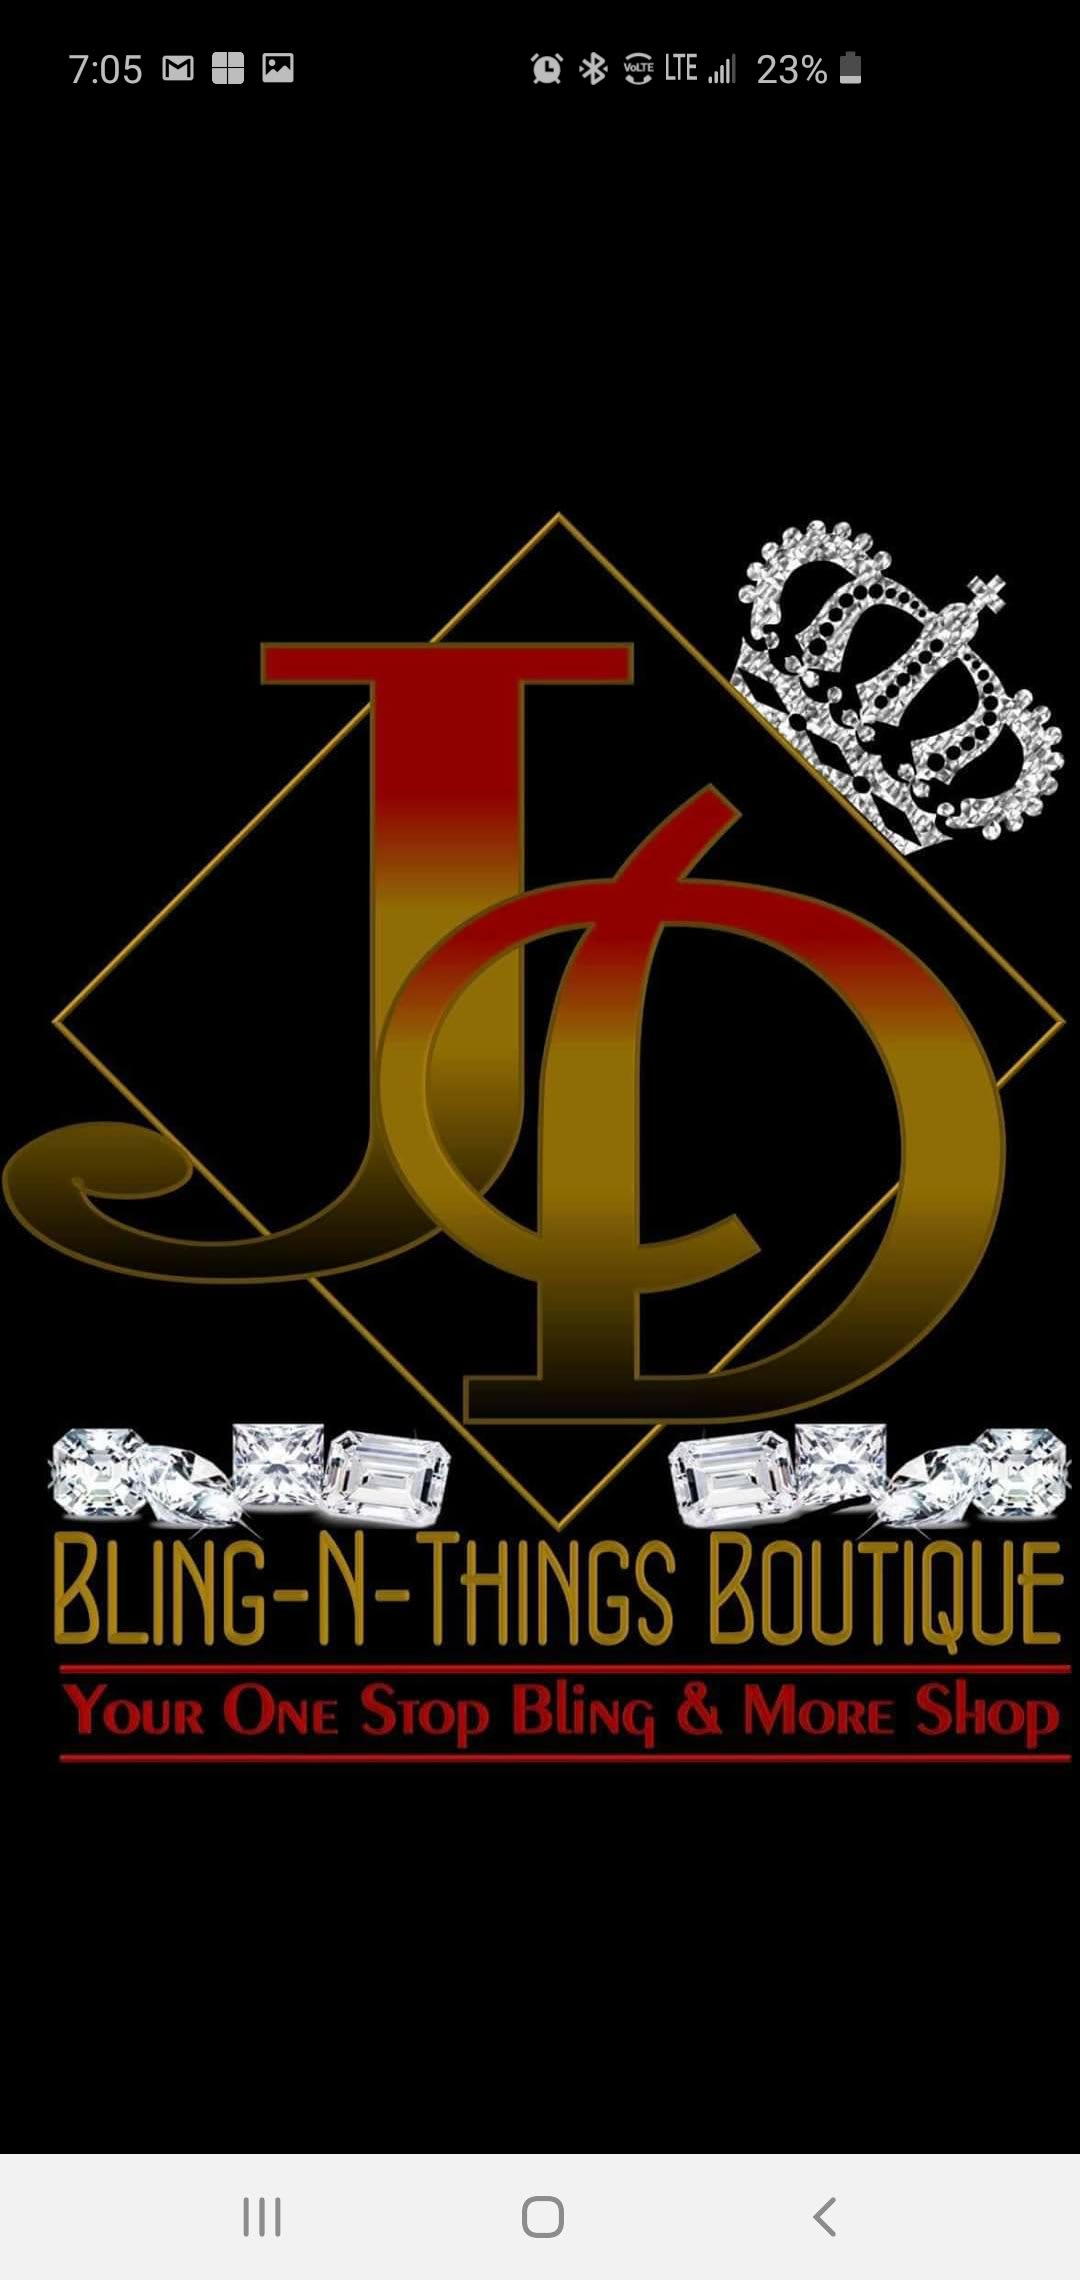 Jd's Bling Boutique